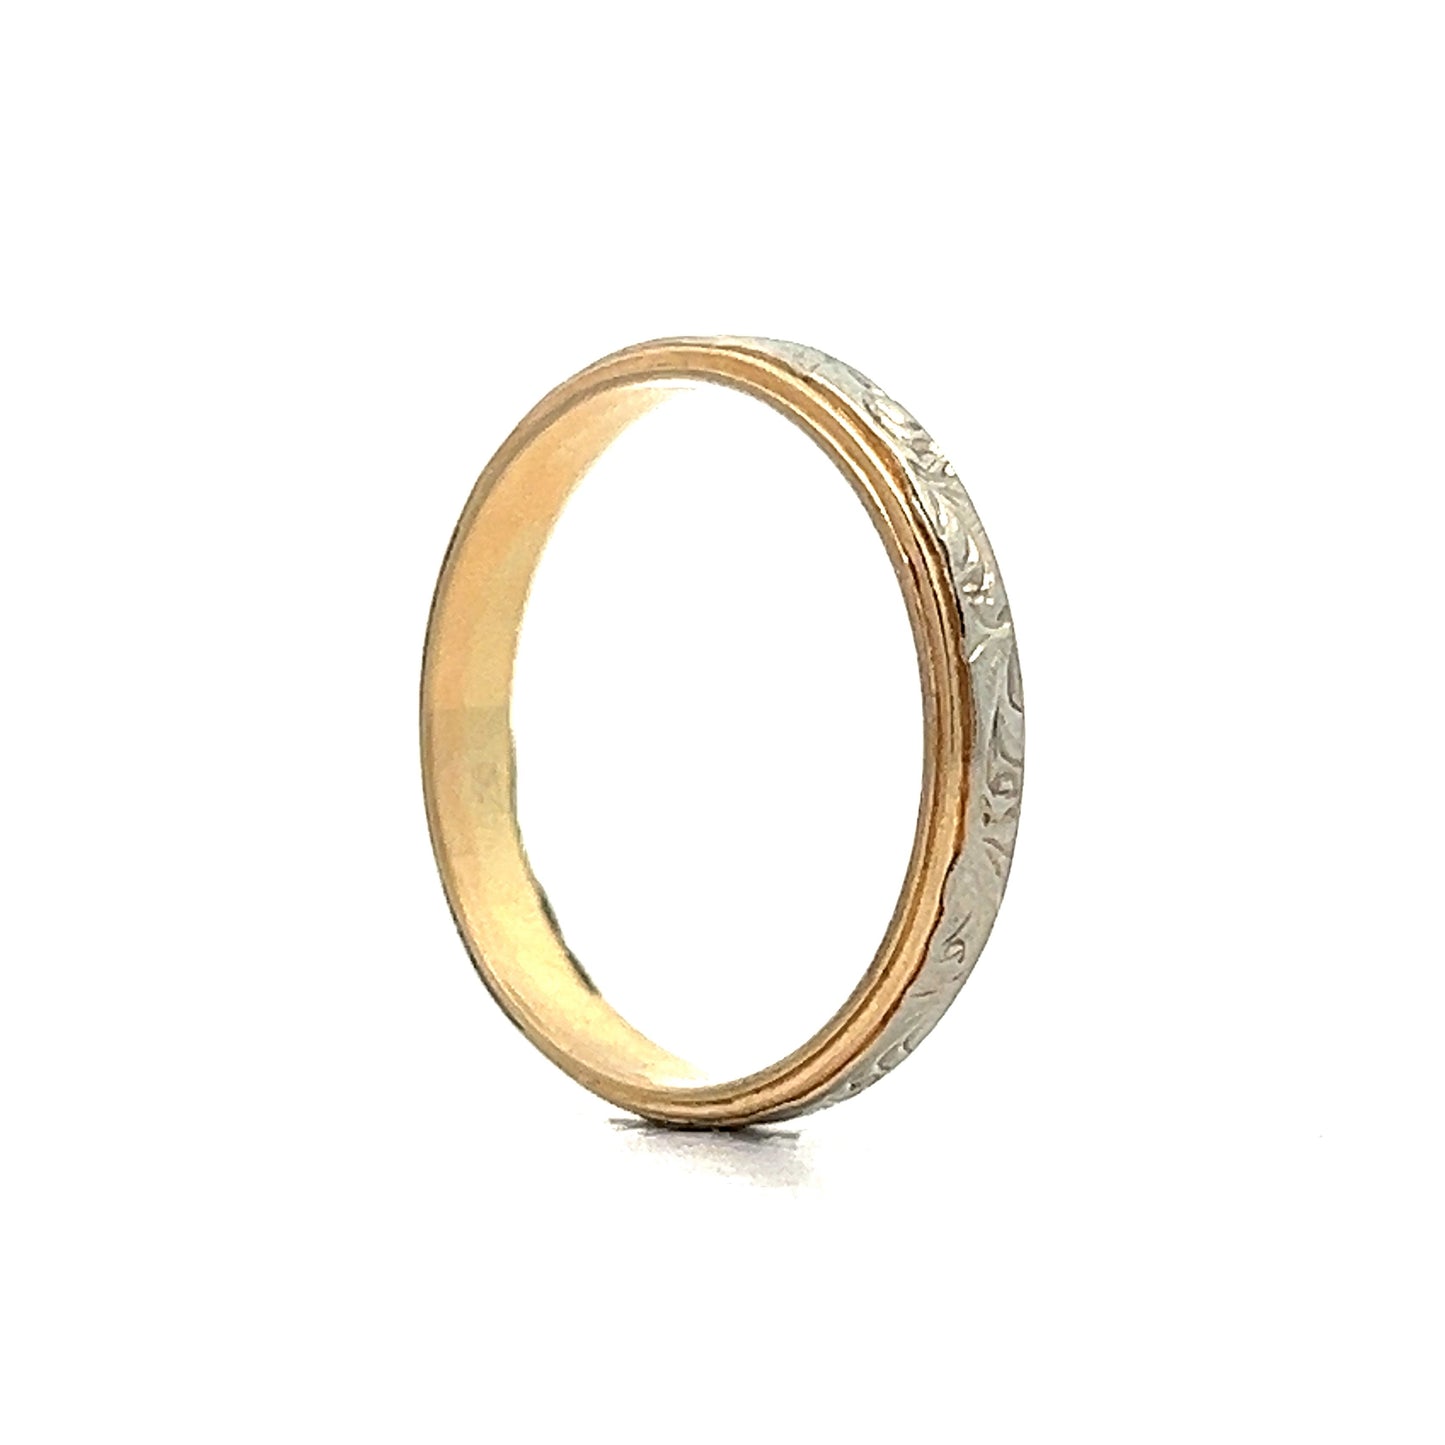 Retro Two-Toned Engraved Wedding Band in 14k